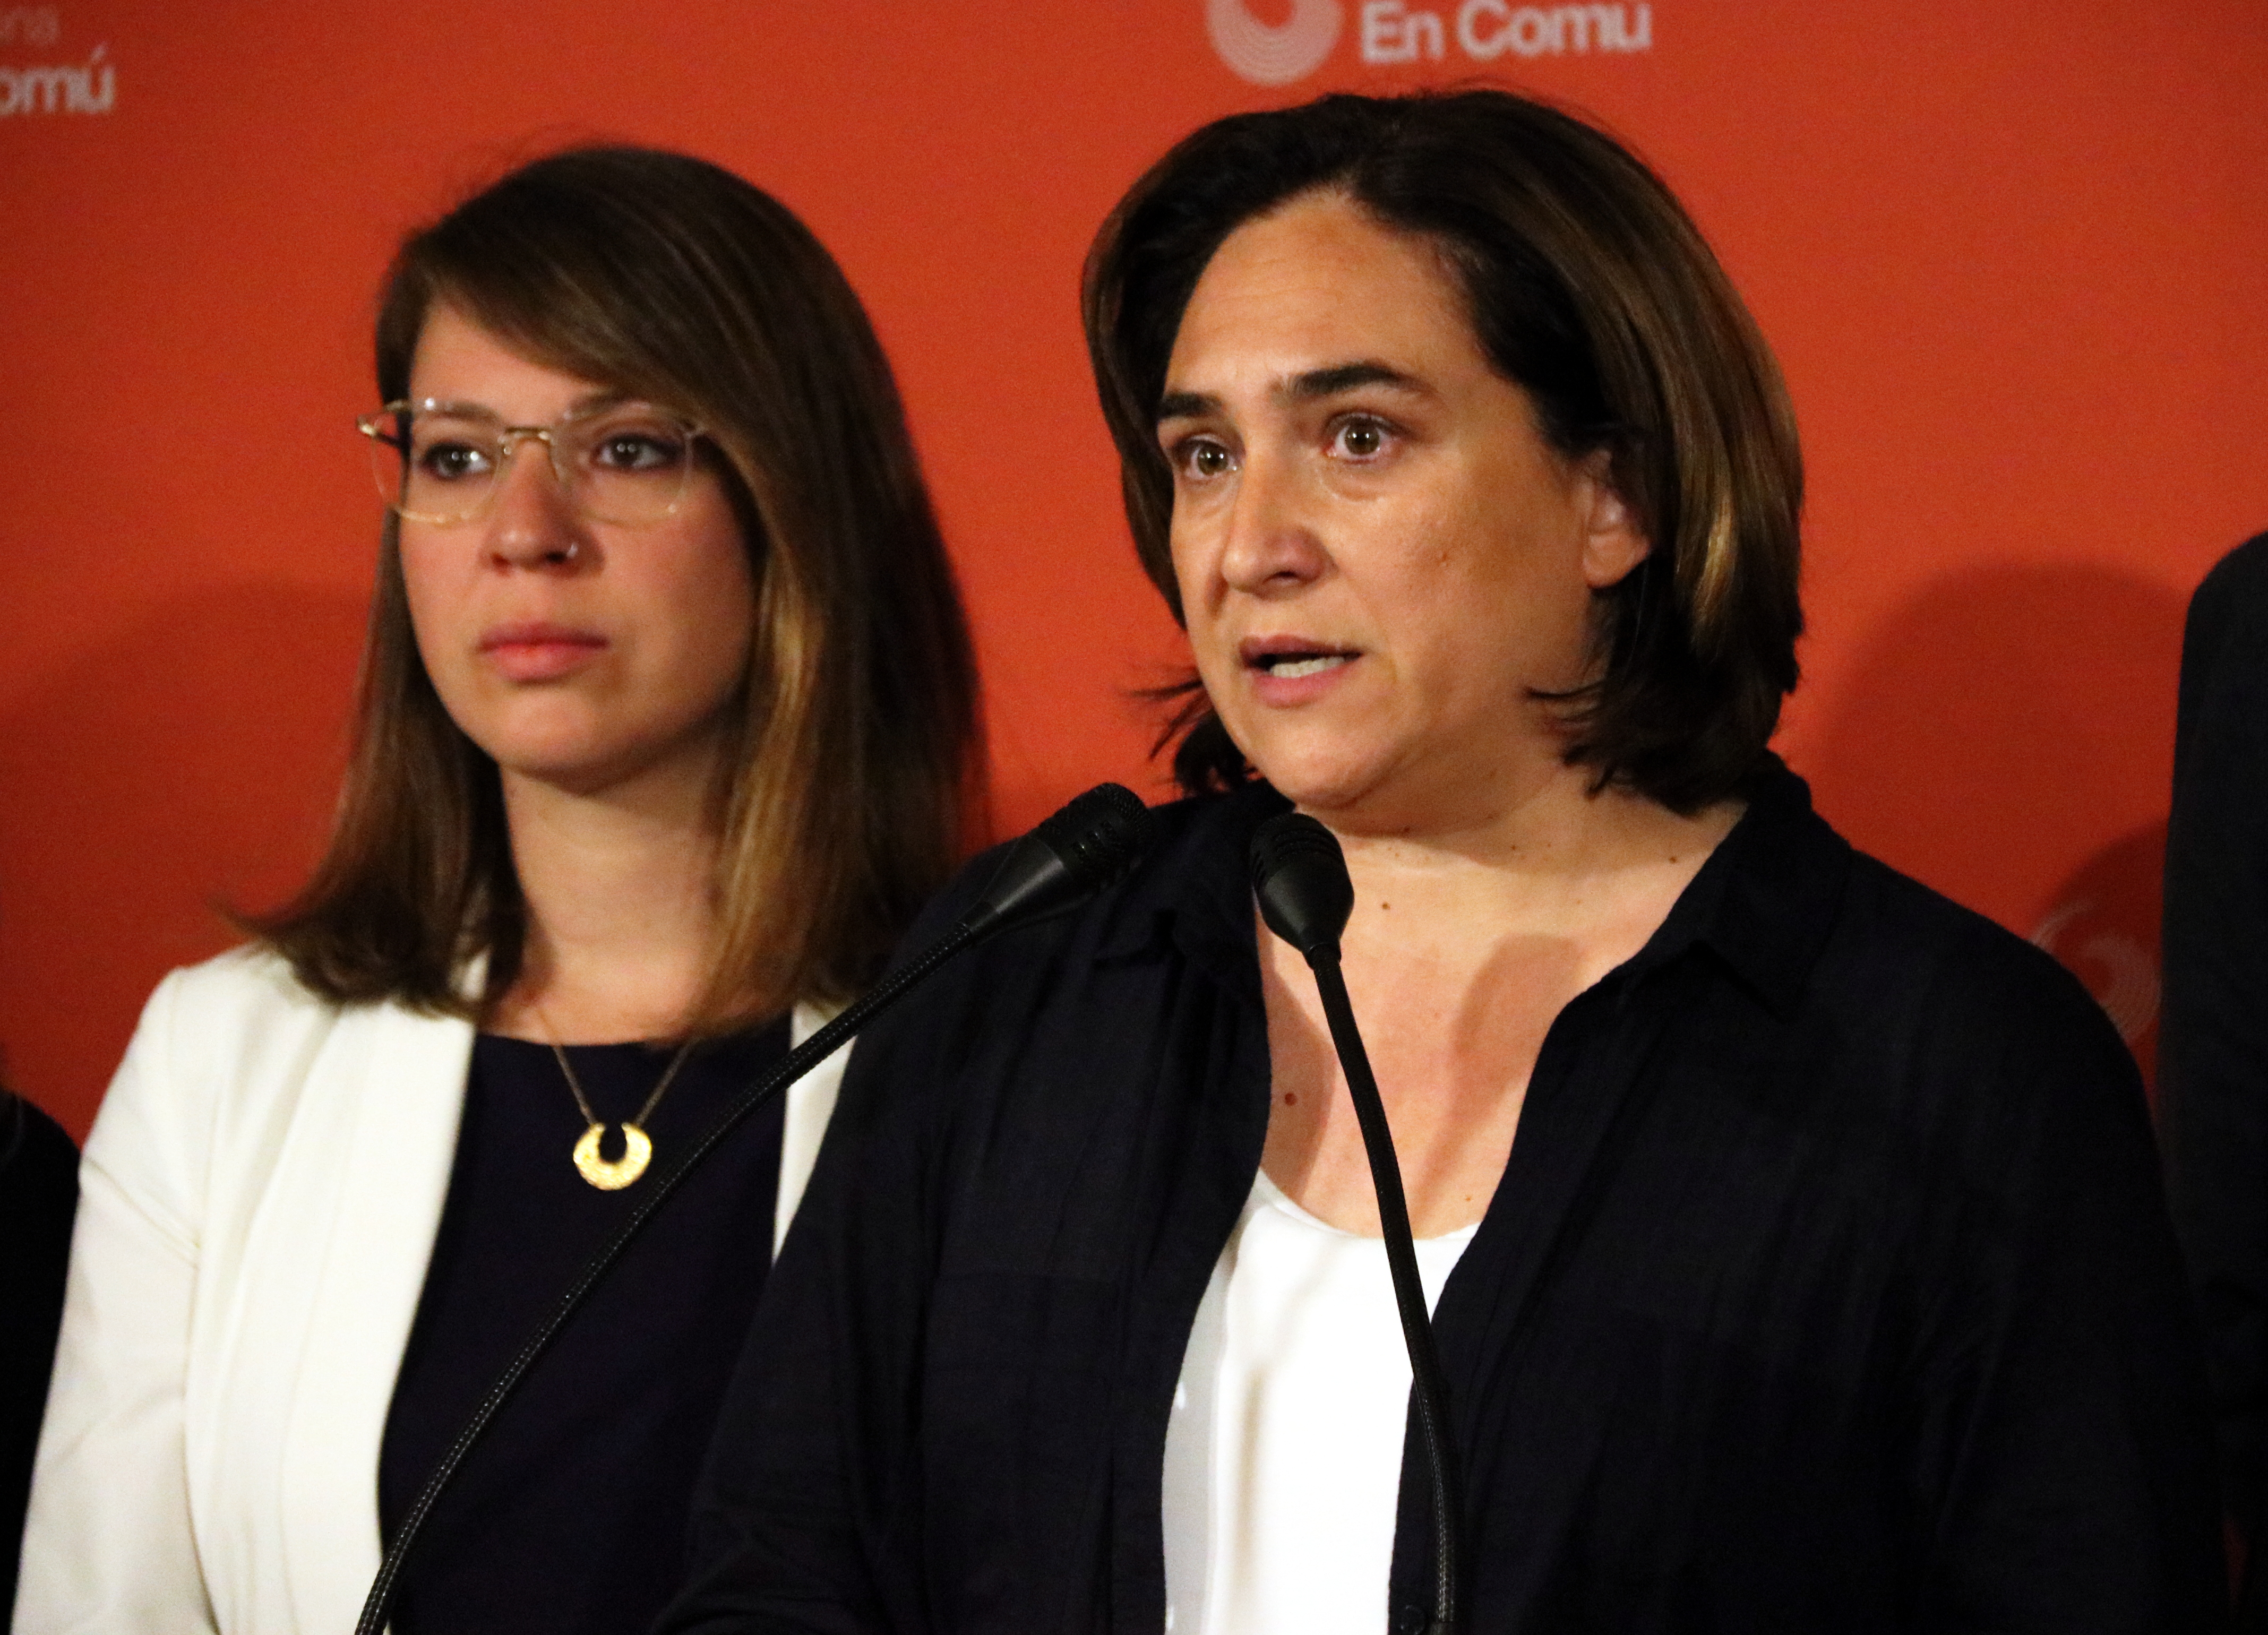 Ada Colau at a press conference on June 13 (ACN/Nazaret Romero)